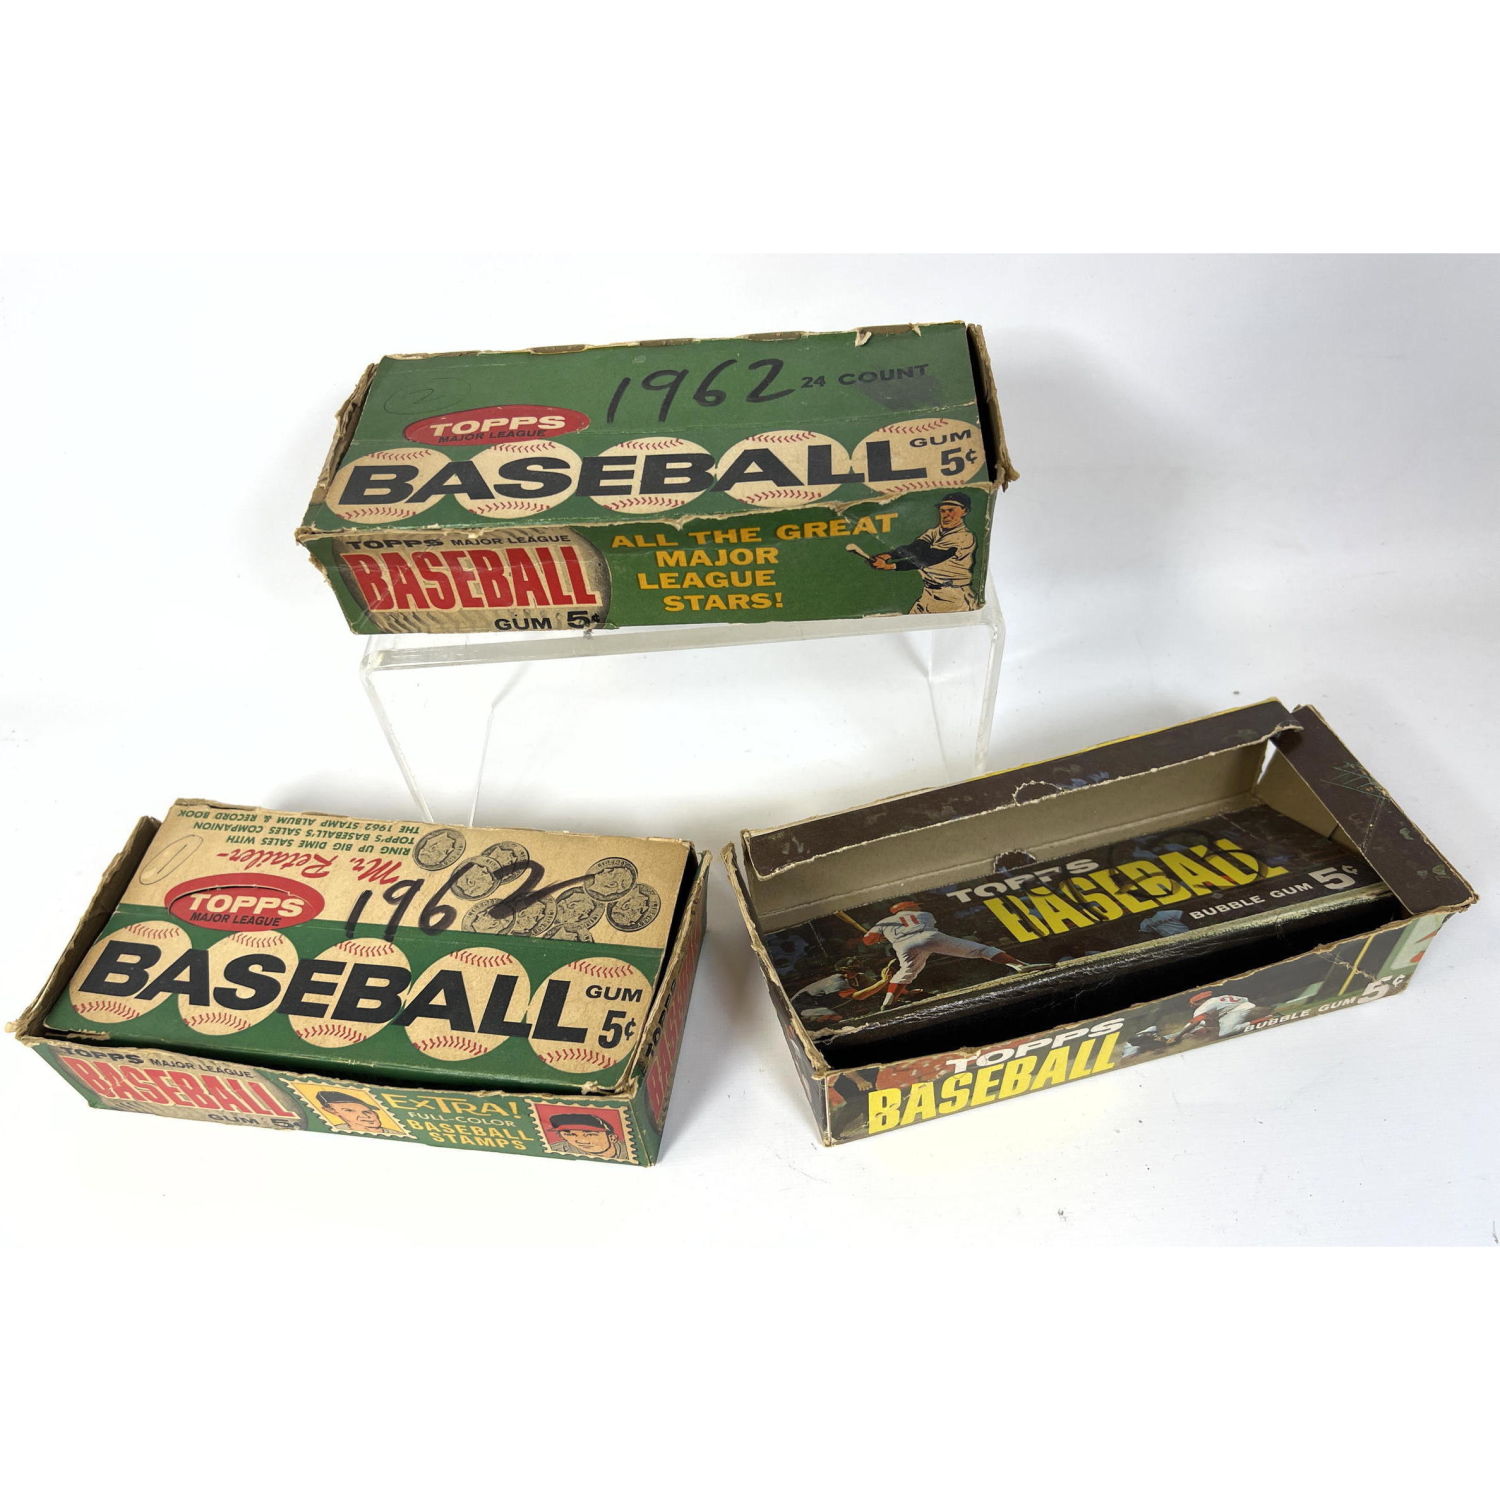 3 Topps baseball cards retail boxes.